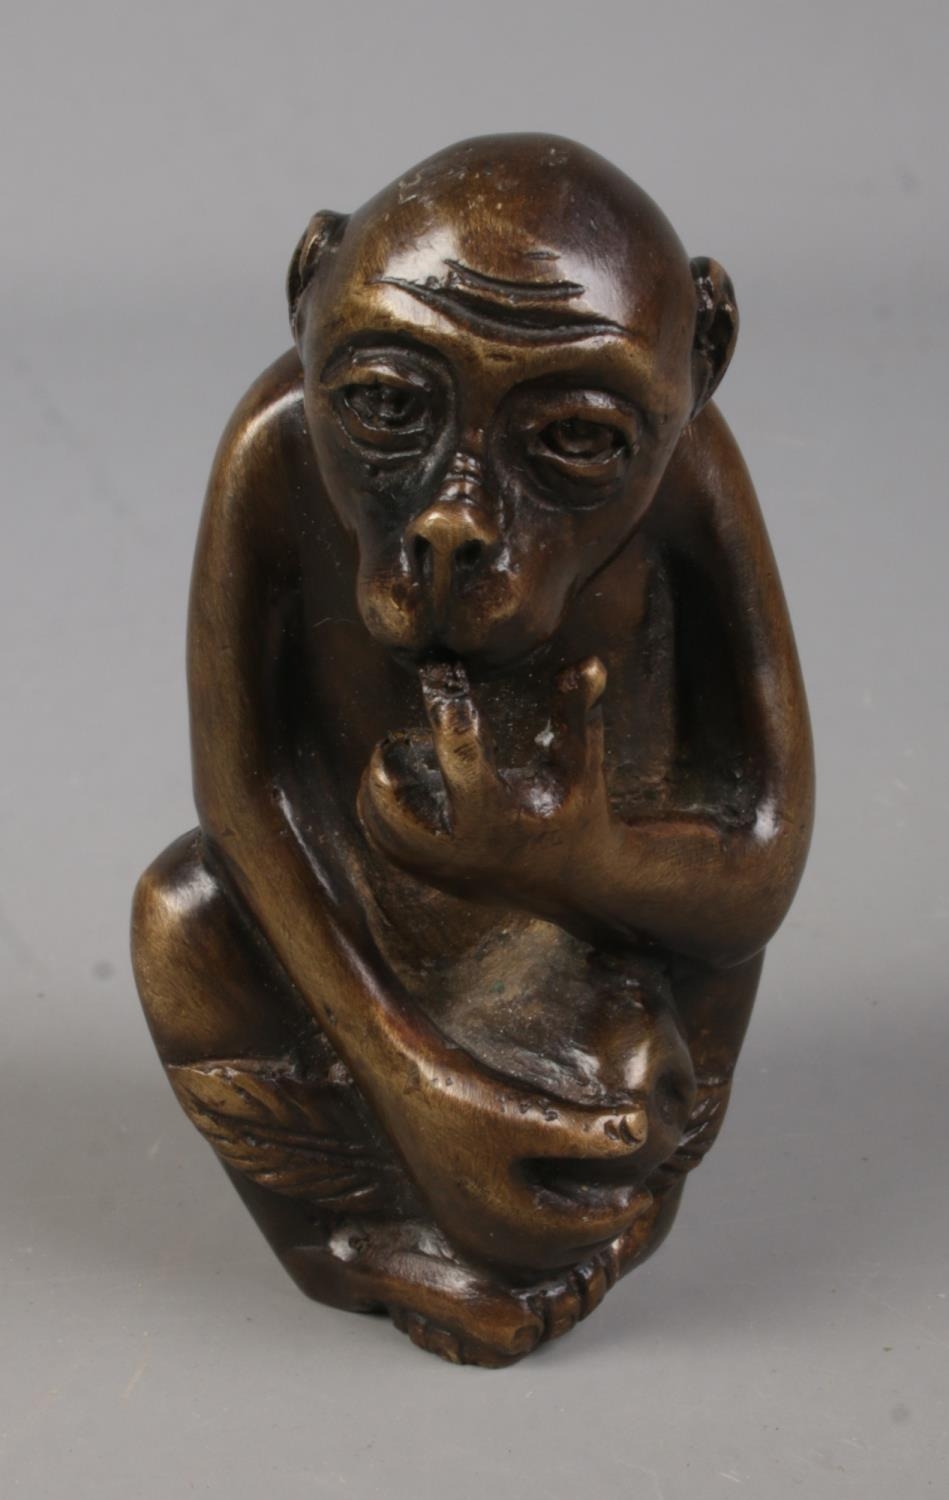 A bronze figure formed as a seated monkey. Approx. height 8cm.